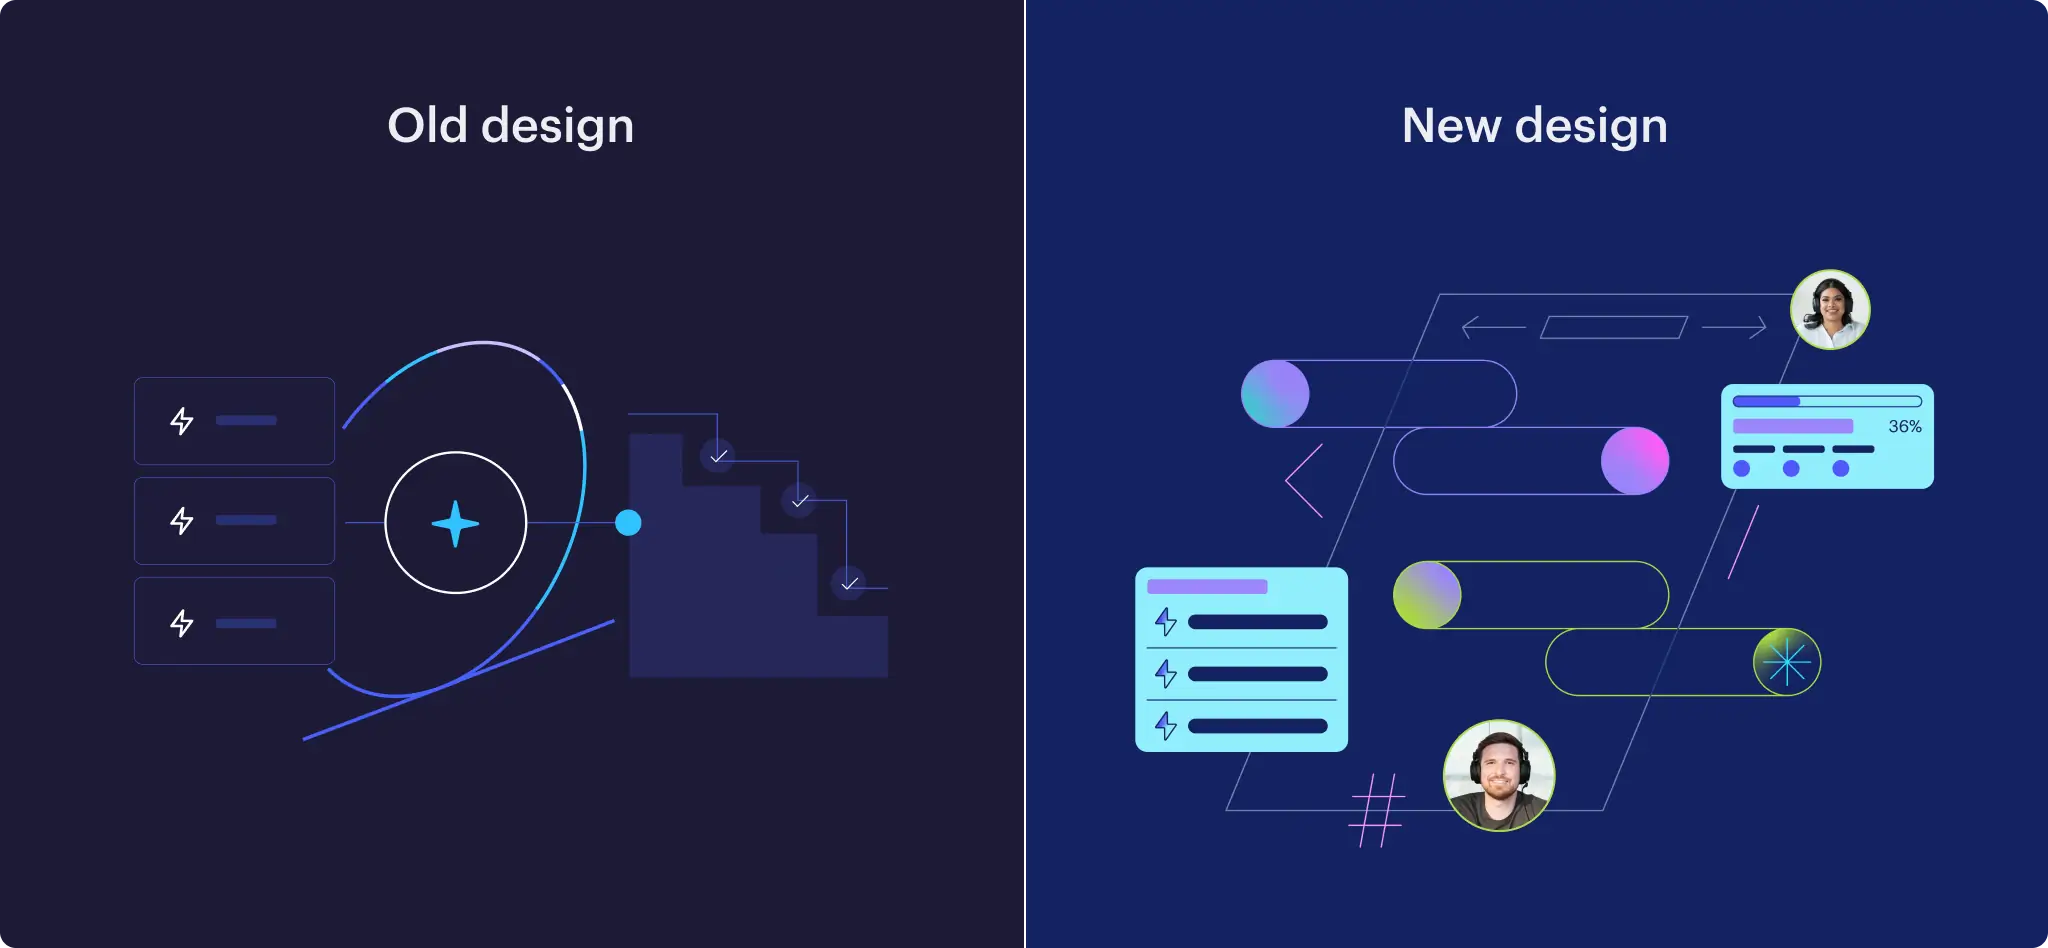 Comparing Zenhub's old space theme to our new human-focused theme